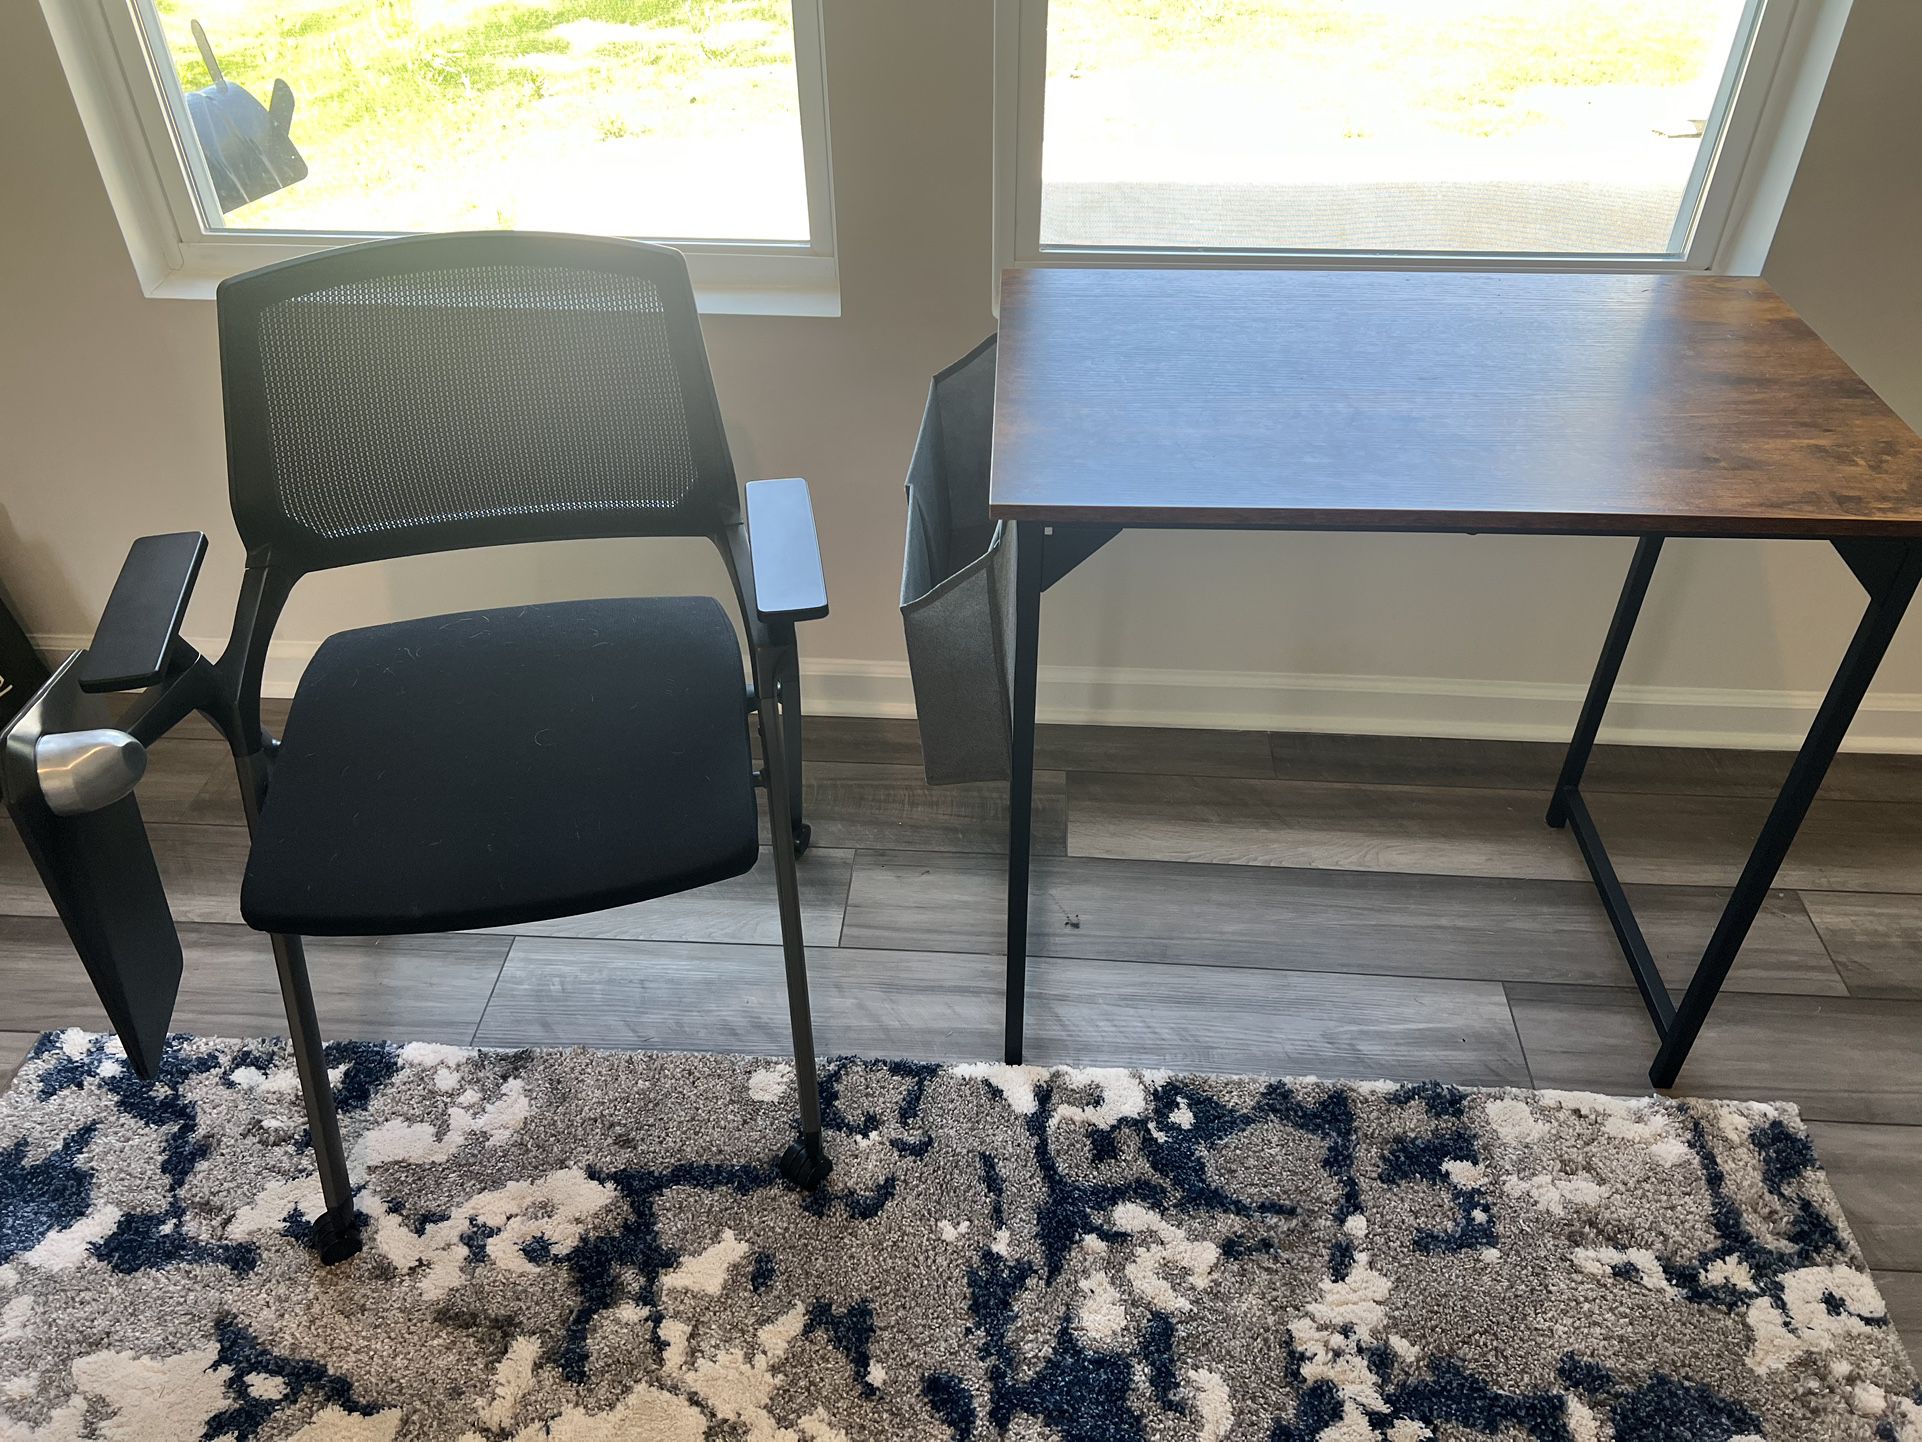 Small Desk And Chair Free